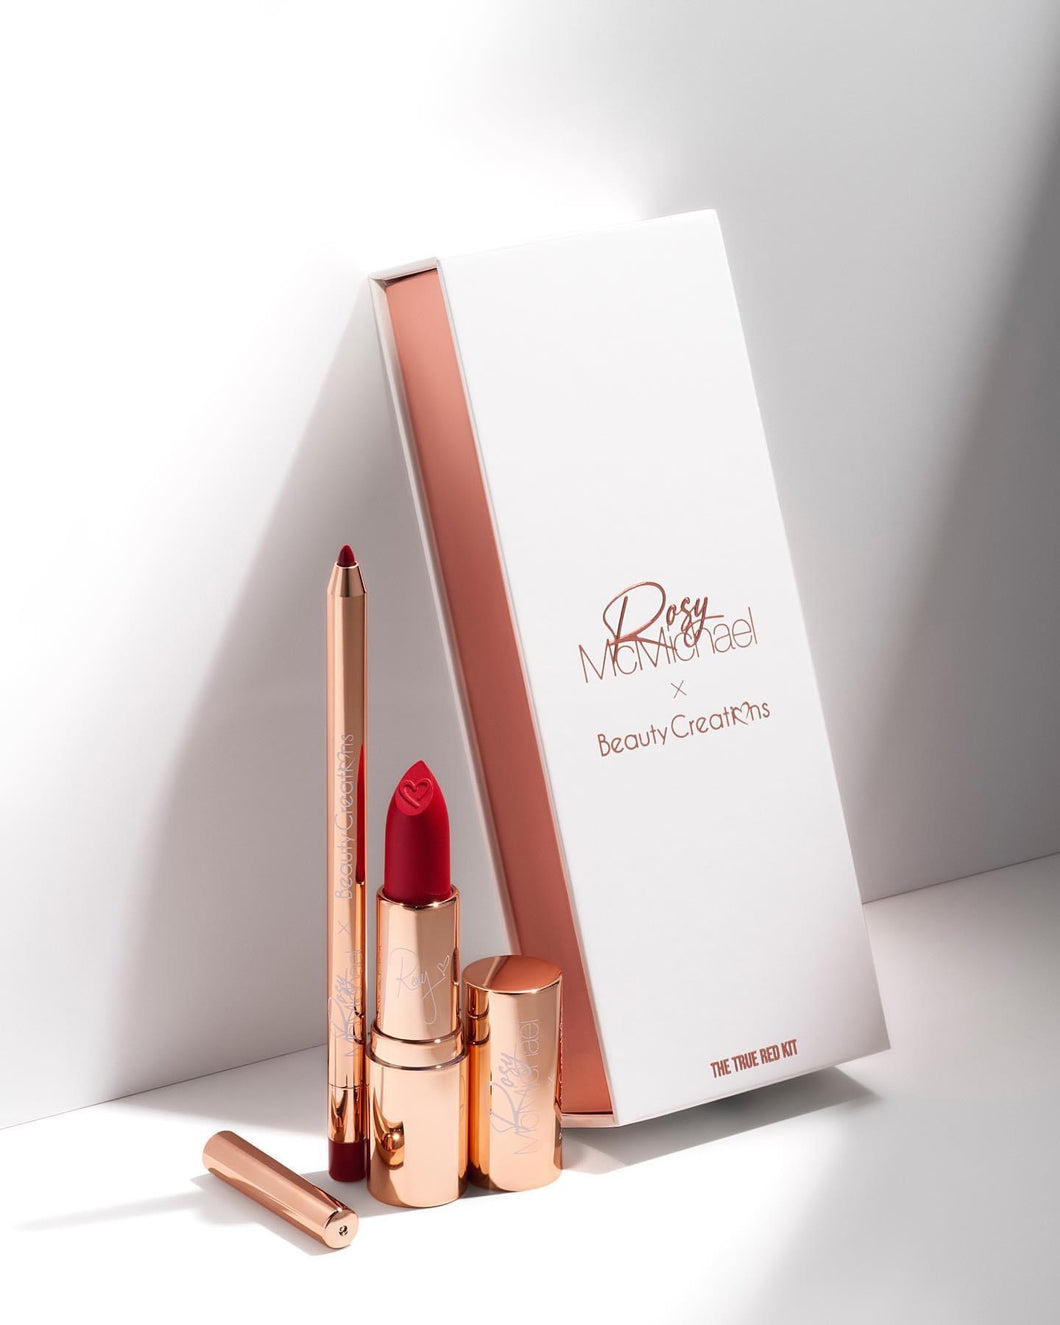 Rosy McMichael x Beauty Creations The true red kit